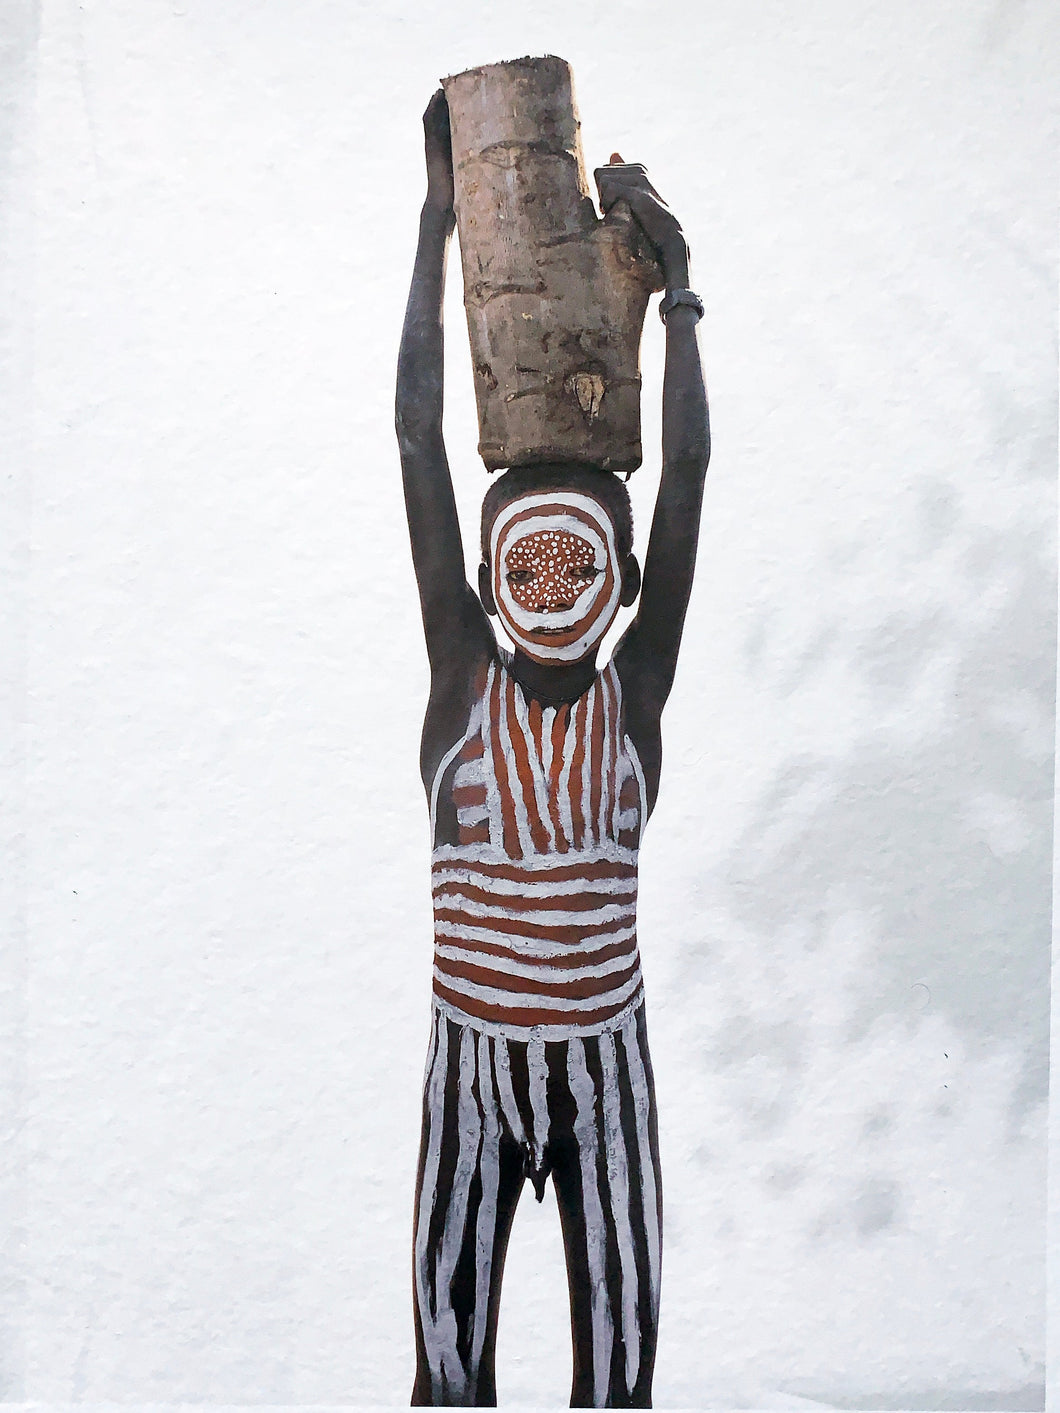 Little Surma Boy, Tribal Child Ethiopia, Africa, 1990s Color Photography on Japanese Paper by Jean-Michel Voge